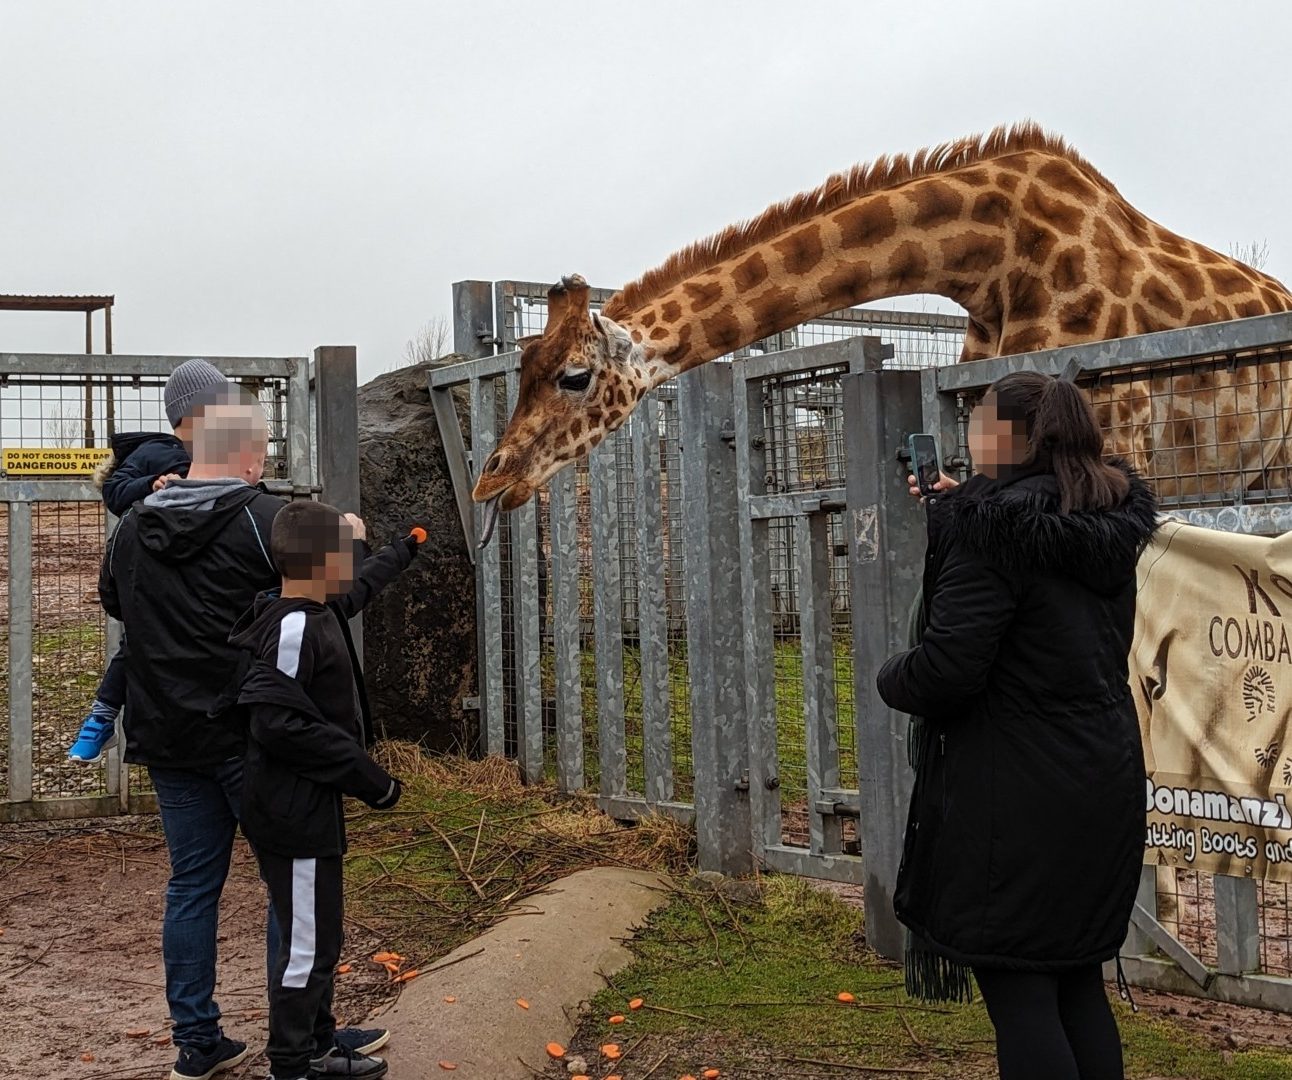 A photo of a giraffe leaning over a metal railing, being fed by some people with blurred faces. The giraffe enclosure is barren